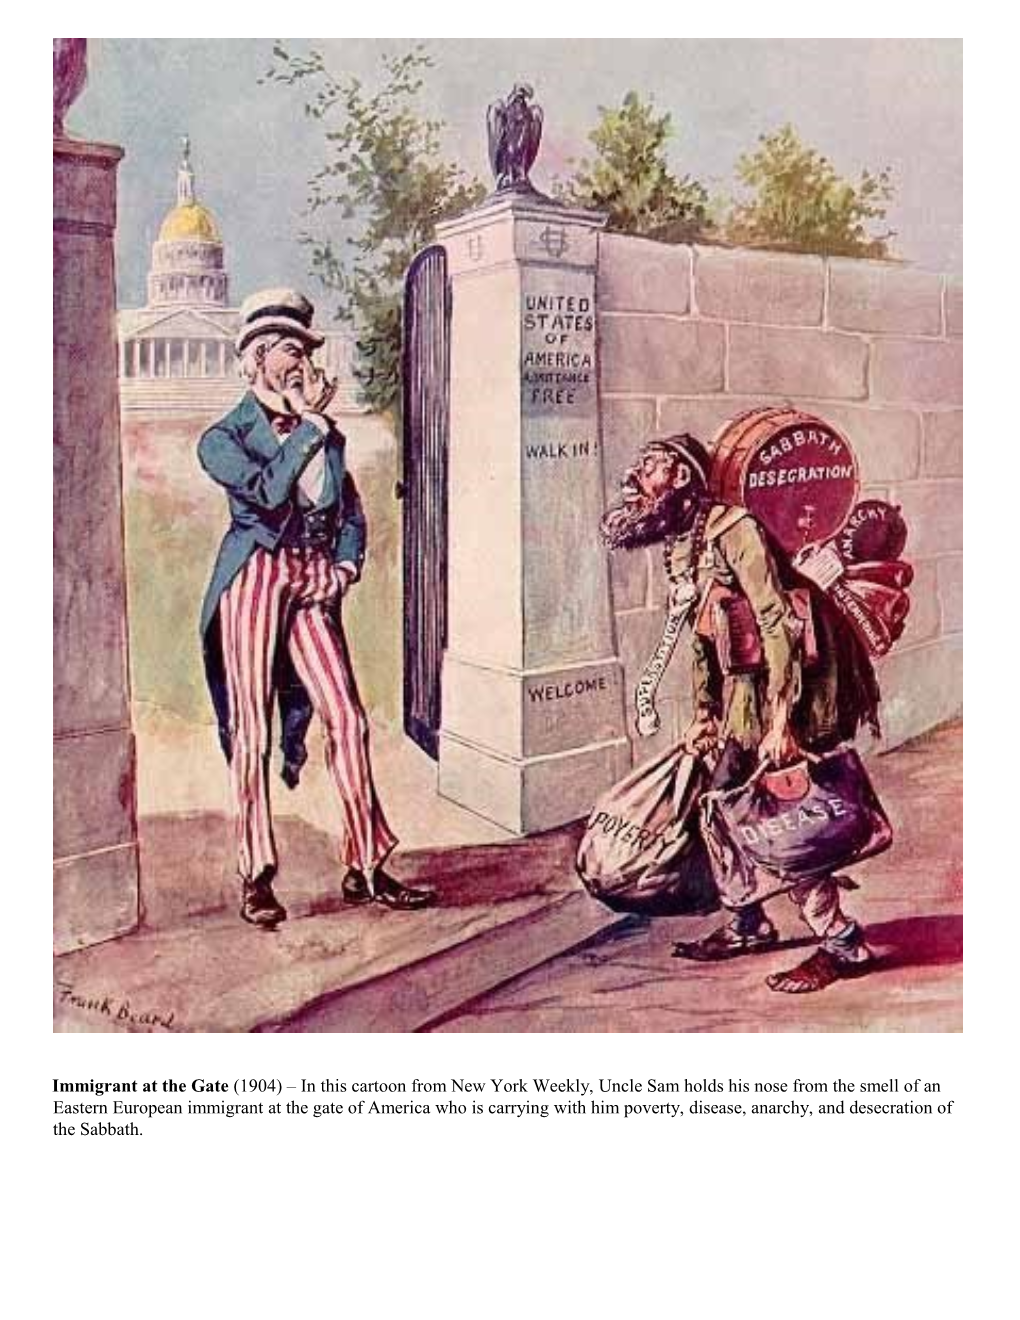 Immigrant at the Gate (1904) in This Cartoon from New York Weekly, Uncle Sam Holds His